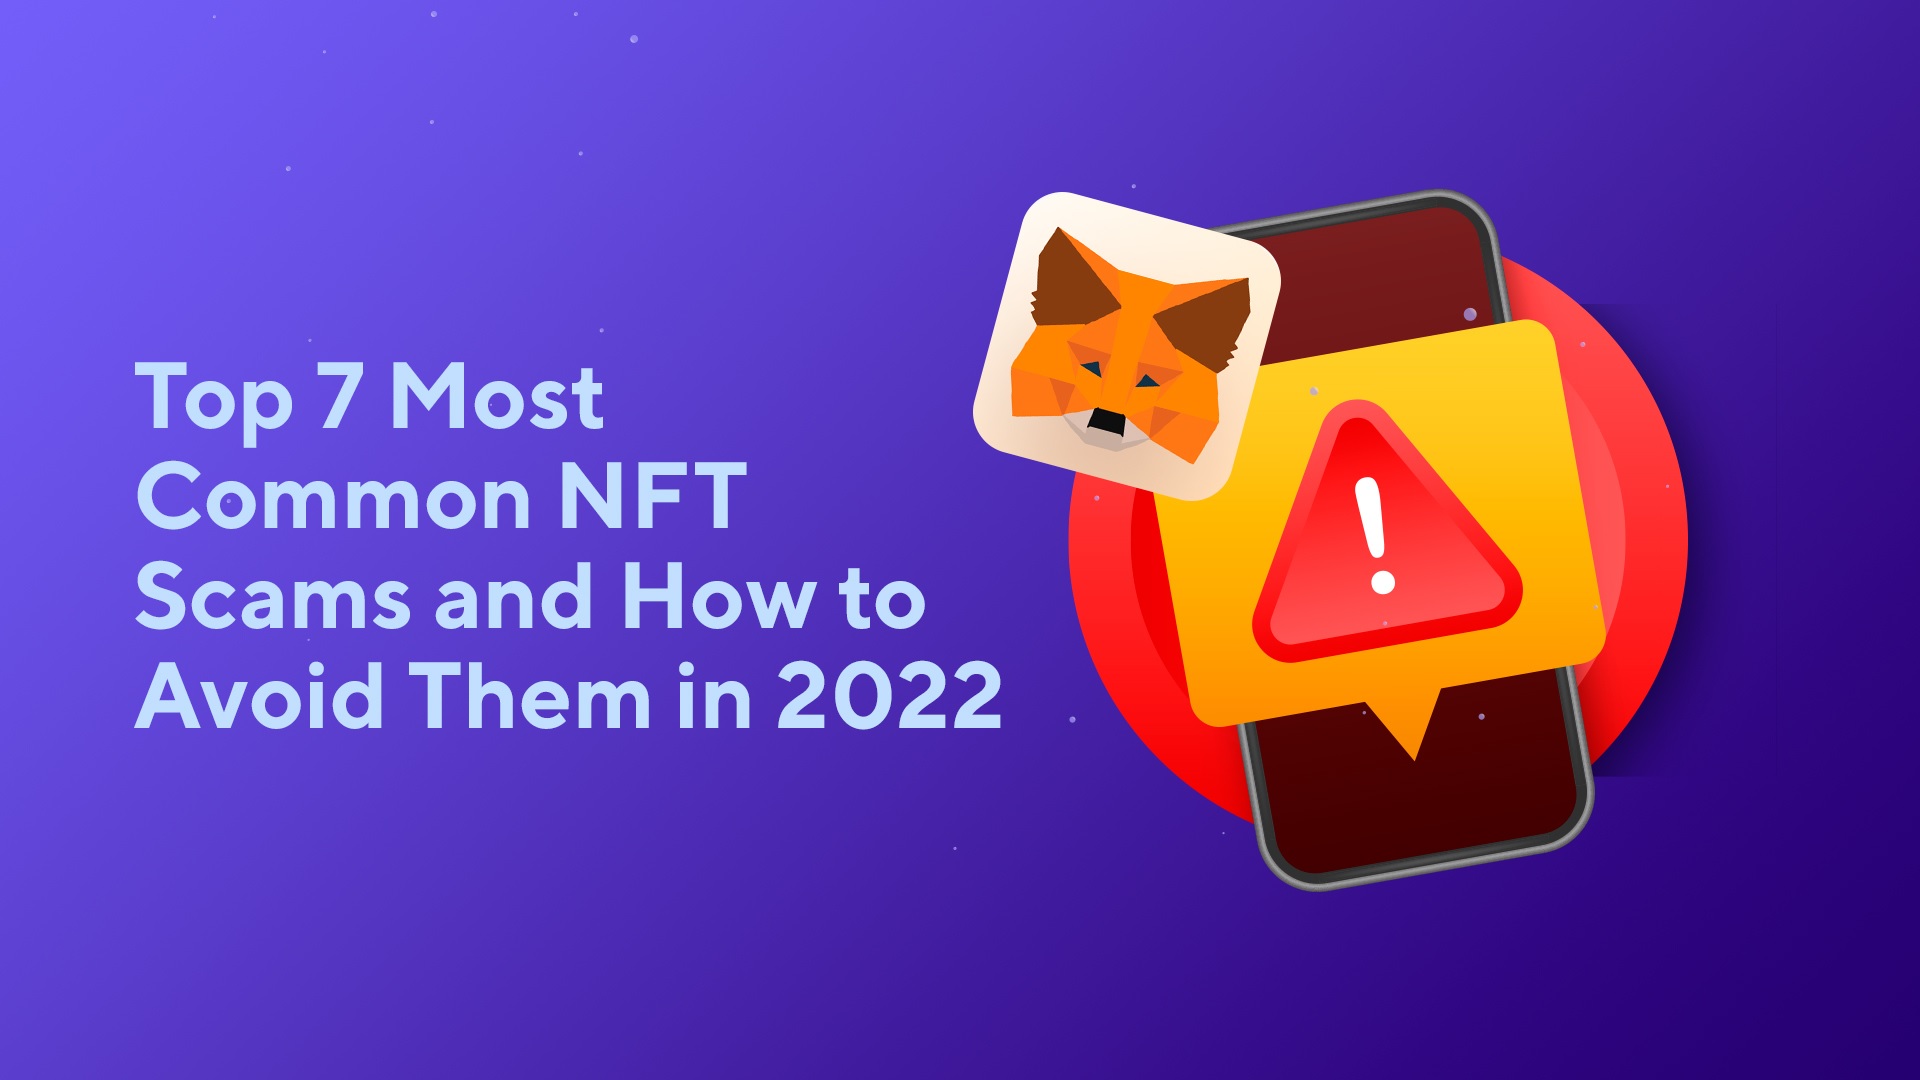 Top 7 Most Common NFT Scams and How to Avoid Them in 2022